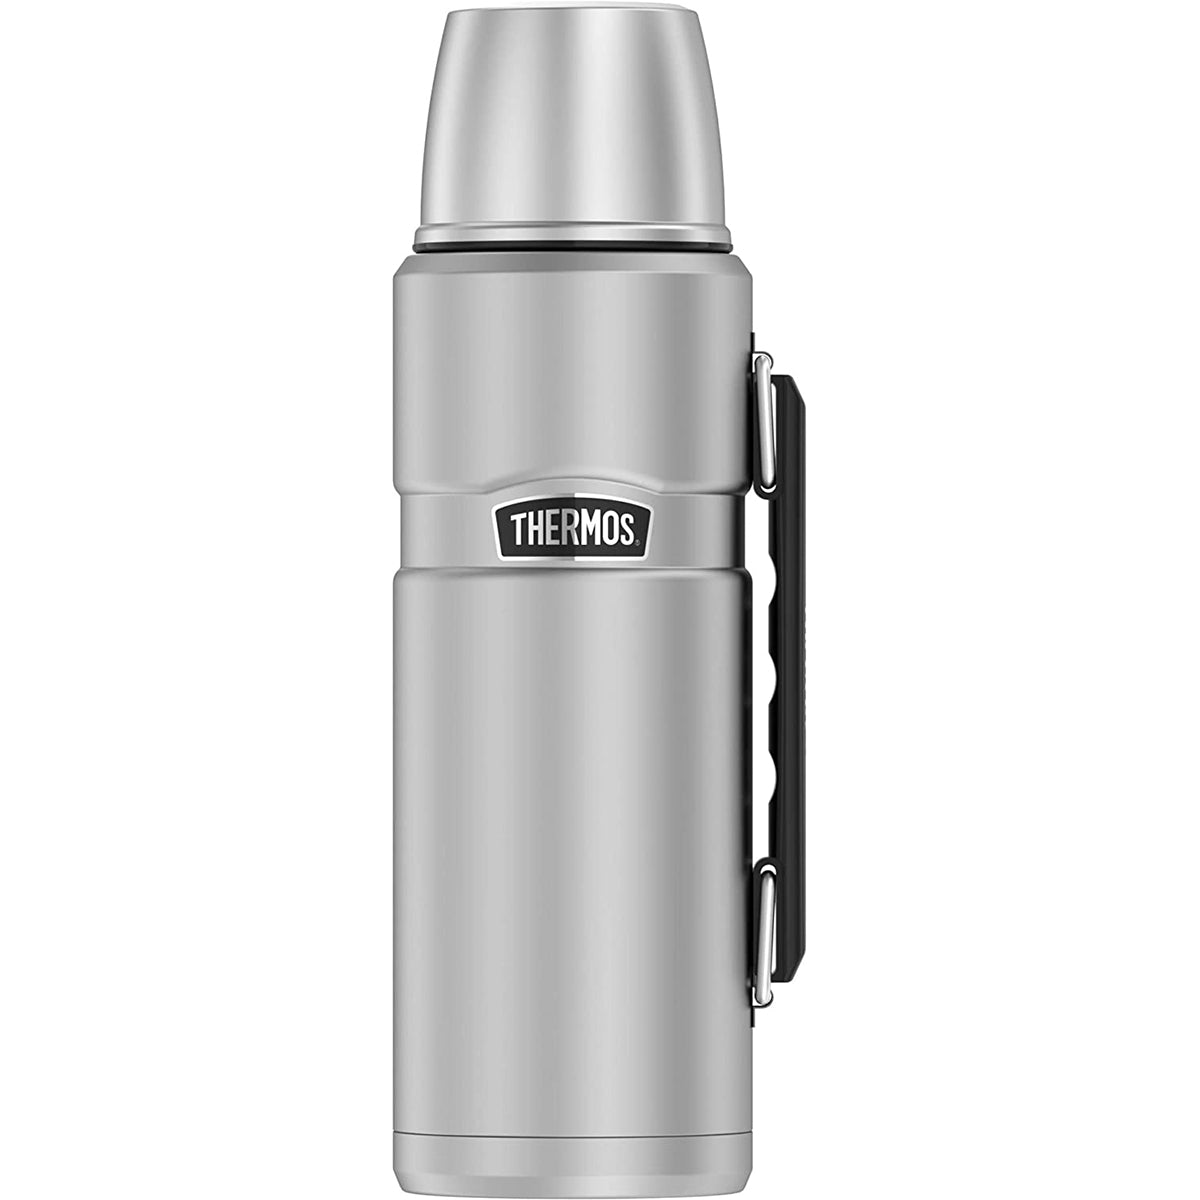 Thermos Stainless King Stainless Steel Compact Beverage Bottle 16 oz